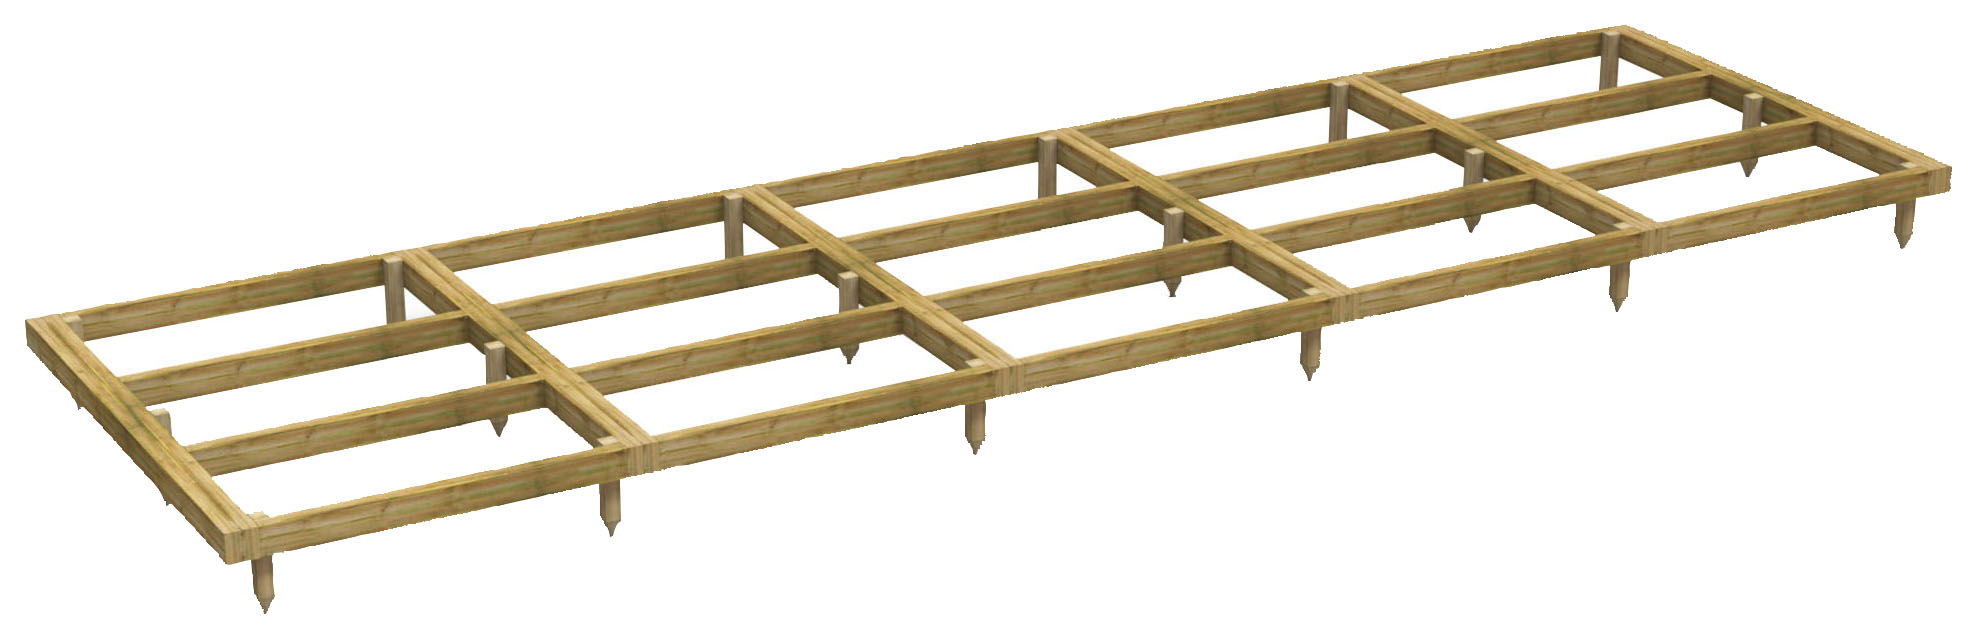 Image of Power Sheds 20 x 6ft Pressure Treated Garden Building Base Kit